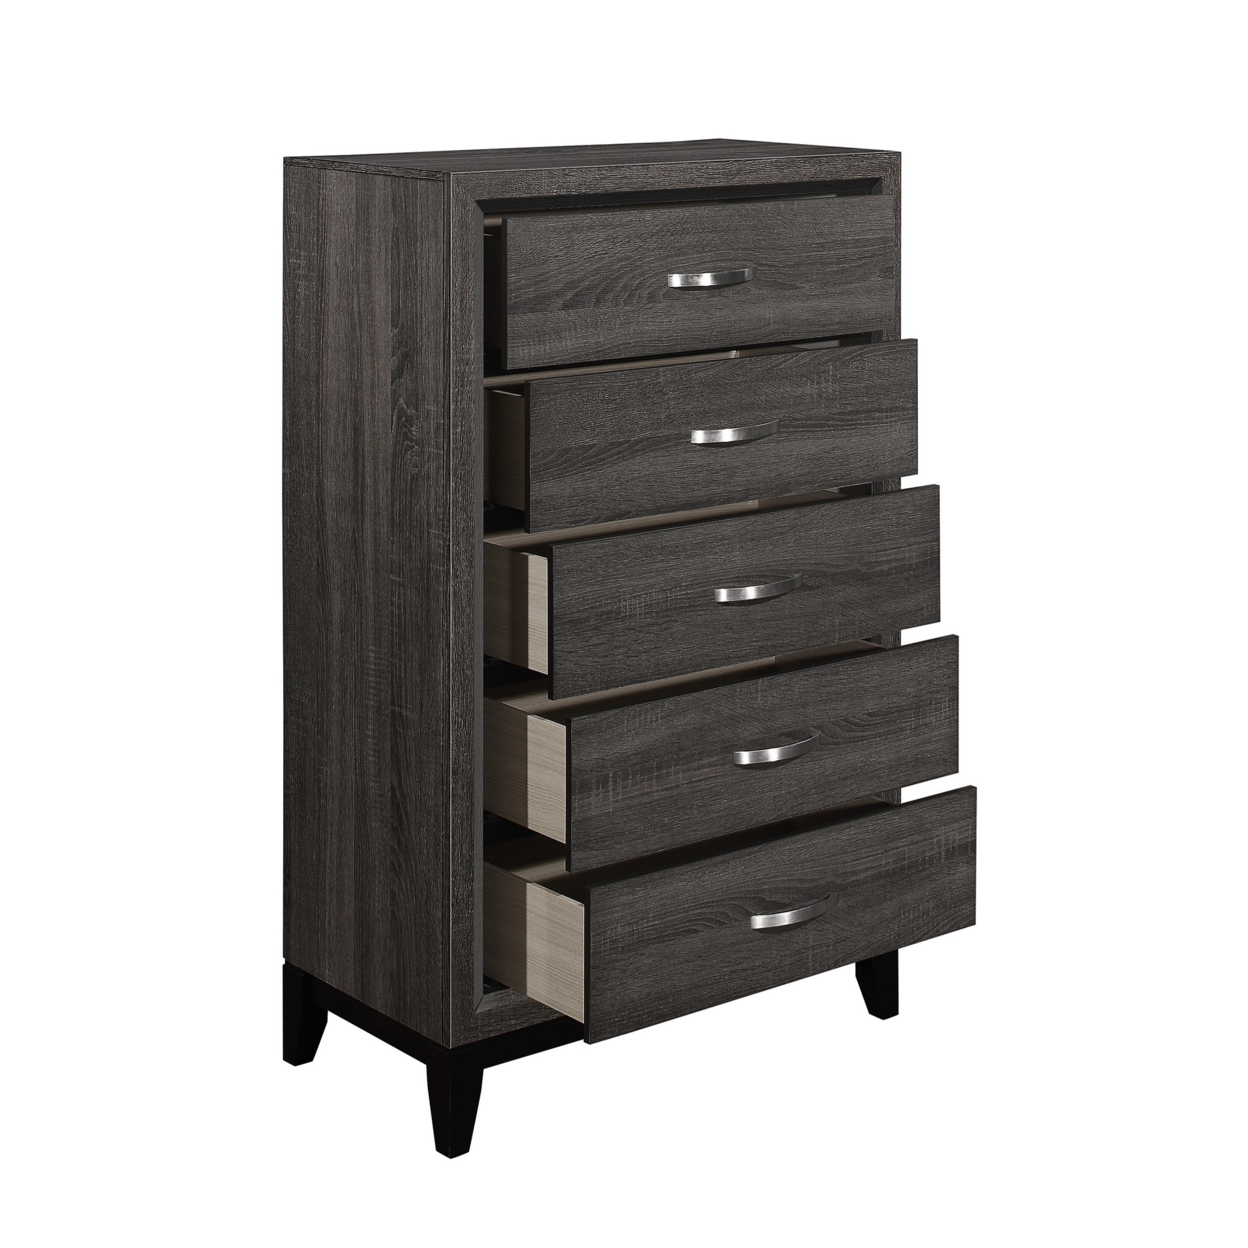 5 Drawer Wooden Chest With Grain Details And Chamfered Feet, Gray- Saltoro Sherpi